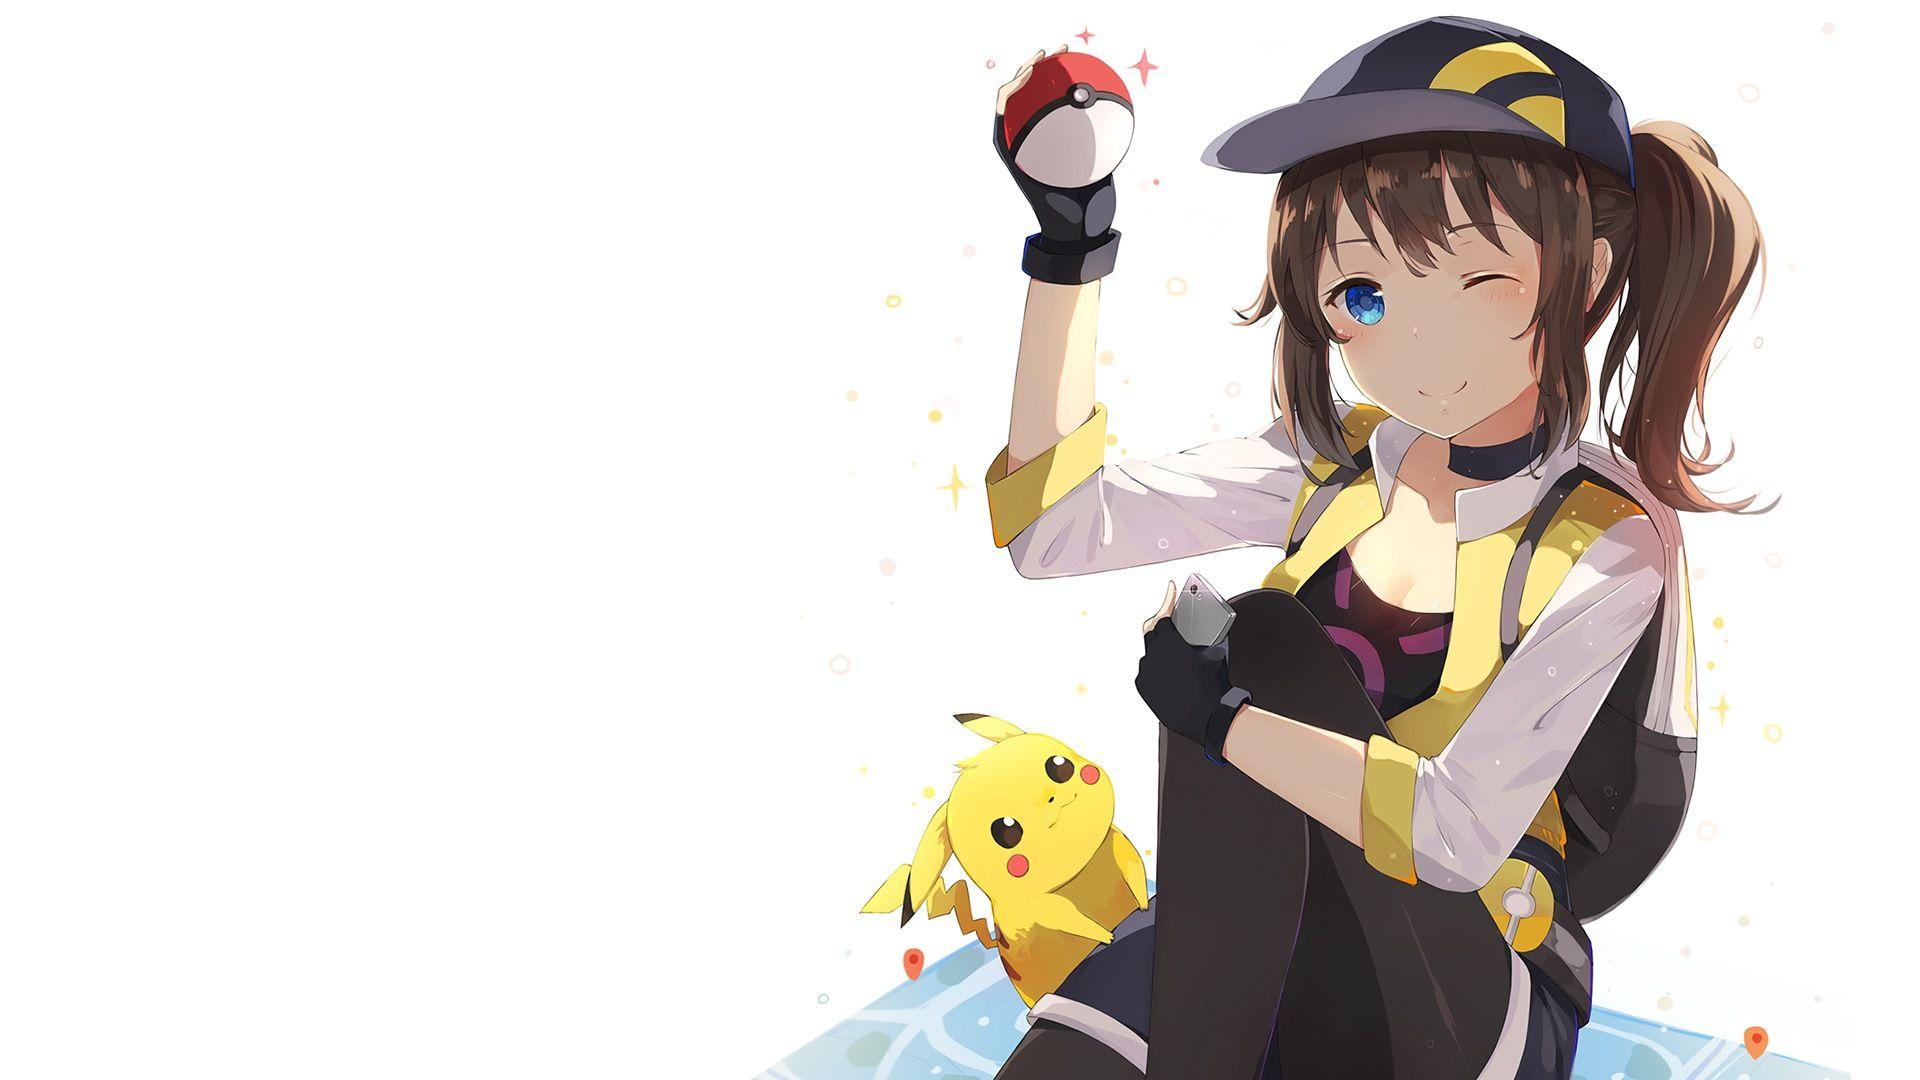 Female Pokemon Trainer Wallpapers Top Free Female Pokemon Trainer Backgrounds Wallpaperaccess 0919